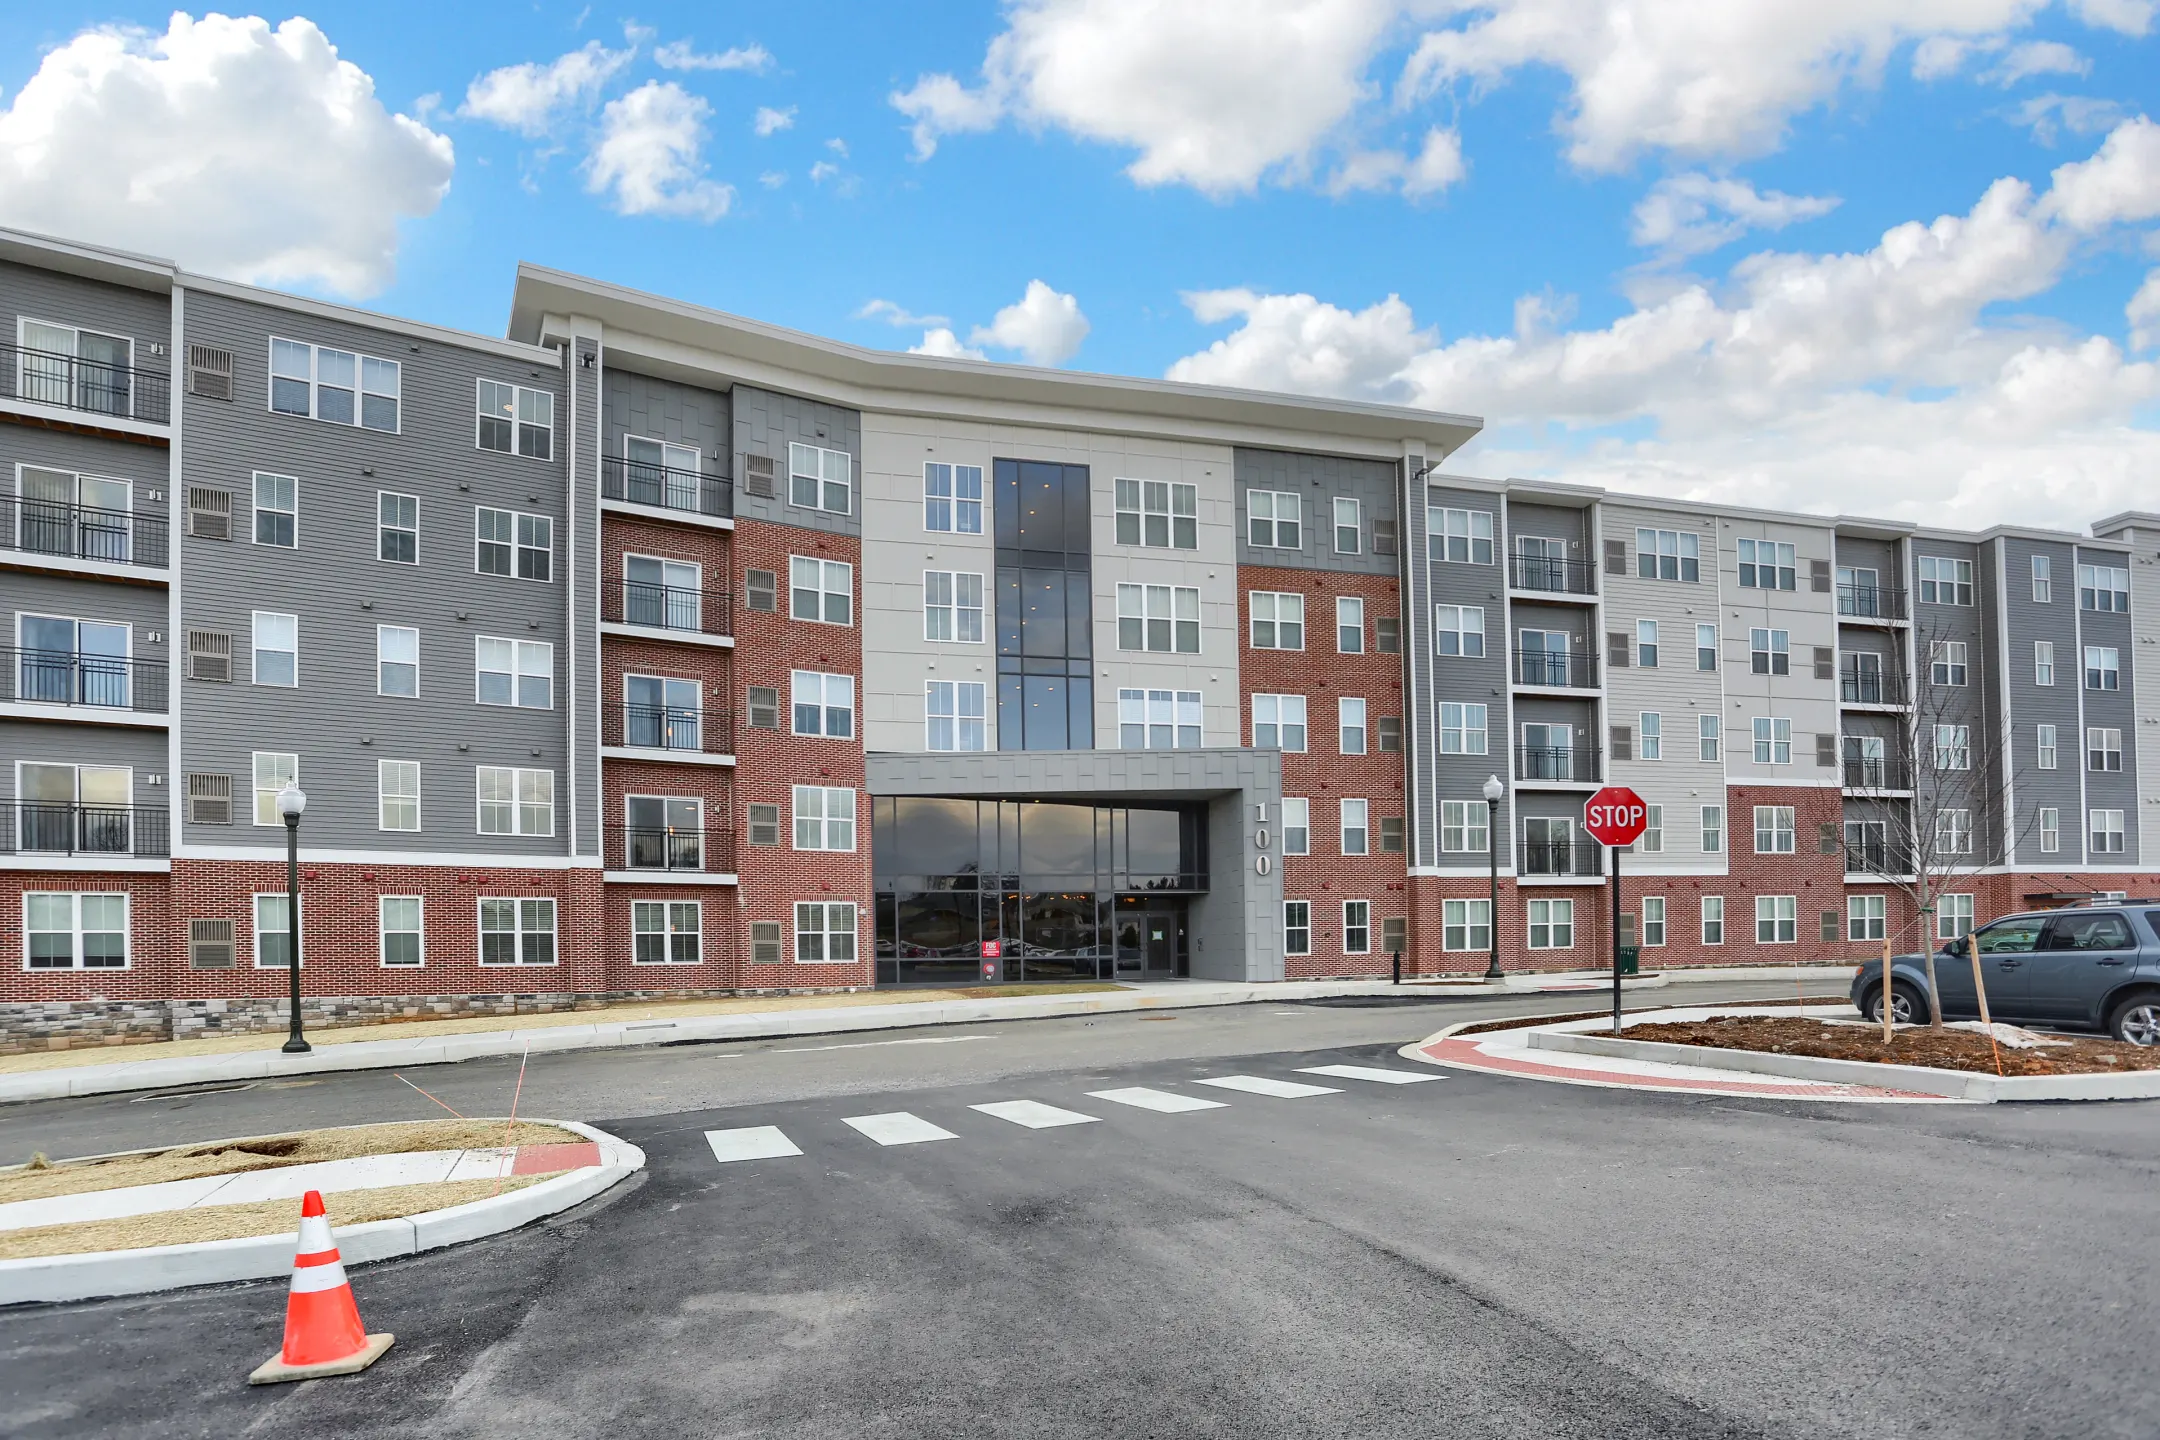 Building - The Apartments at Lititz Springs - Lititz, PA